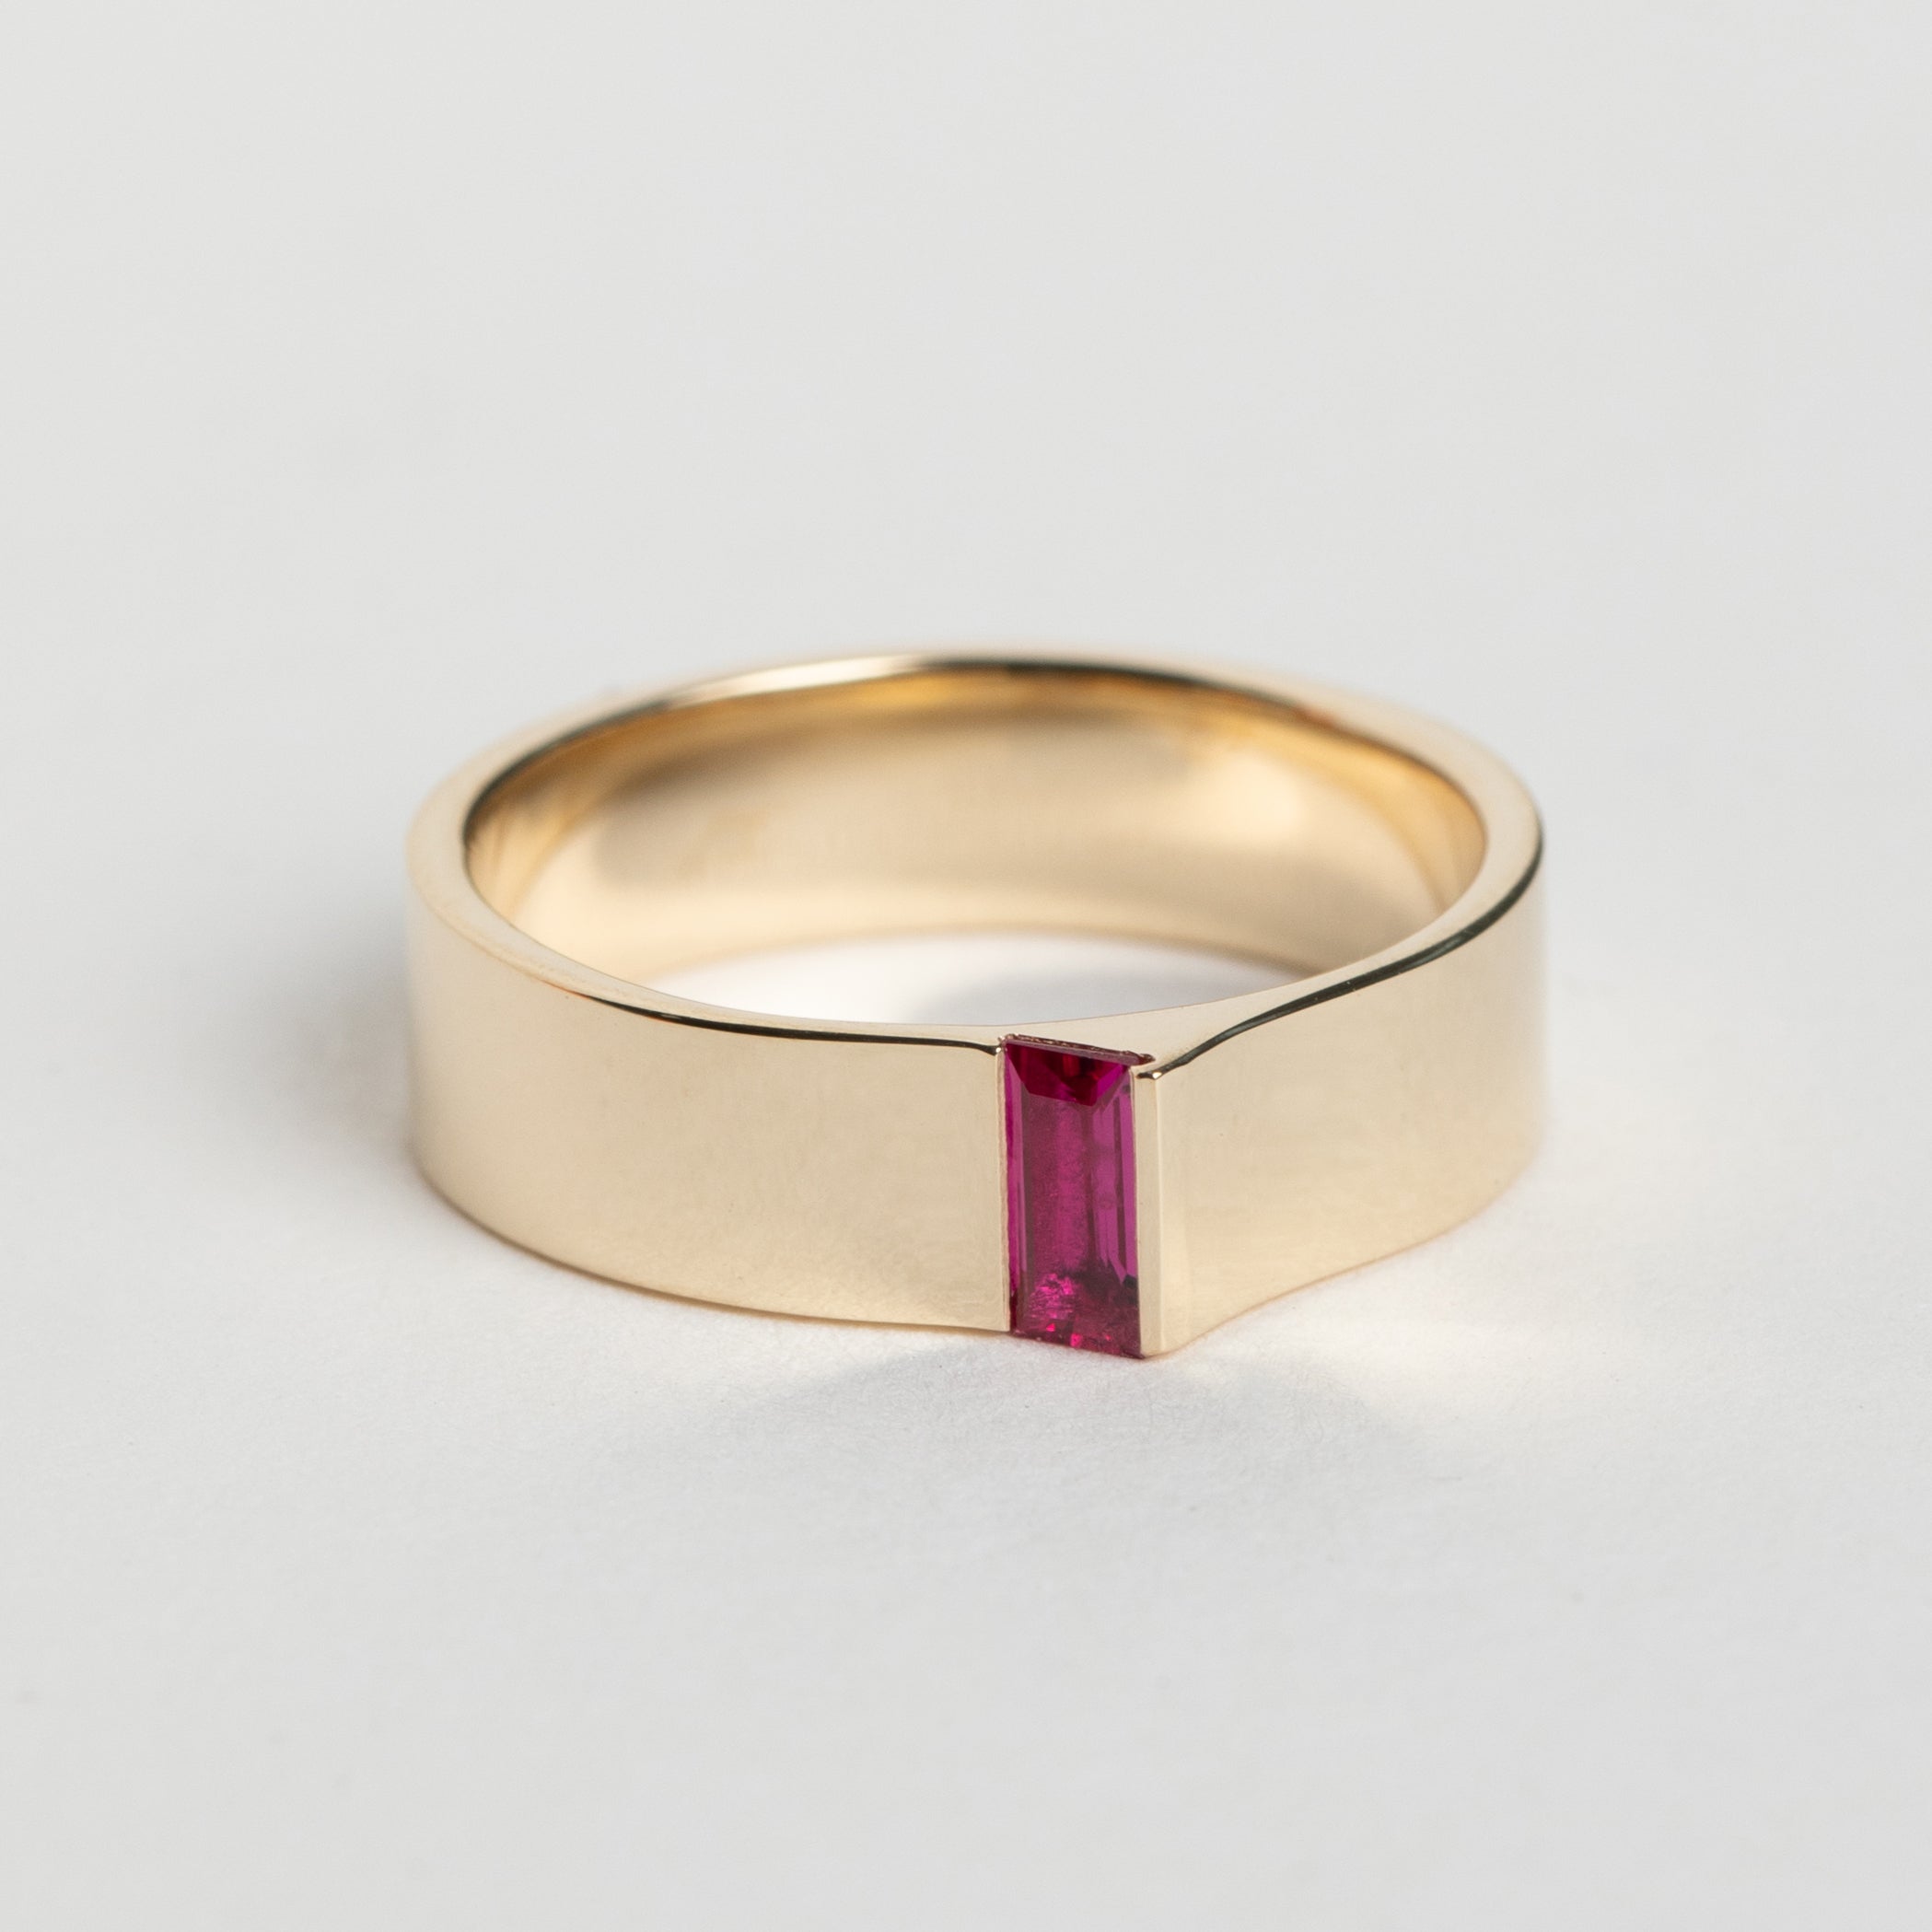 Ethical Braga Ring in 14 karat yellow gold set with a baguette cut precious ruby gemstone by SHW Fine Jewelry made in NYC